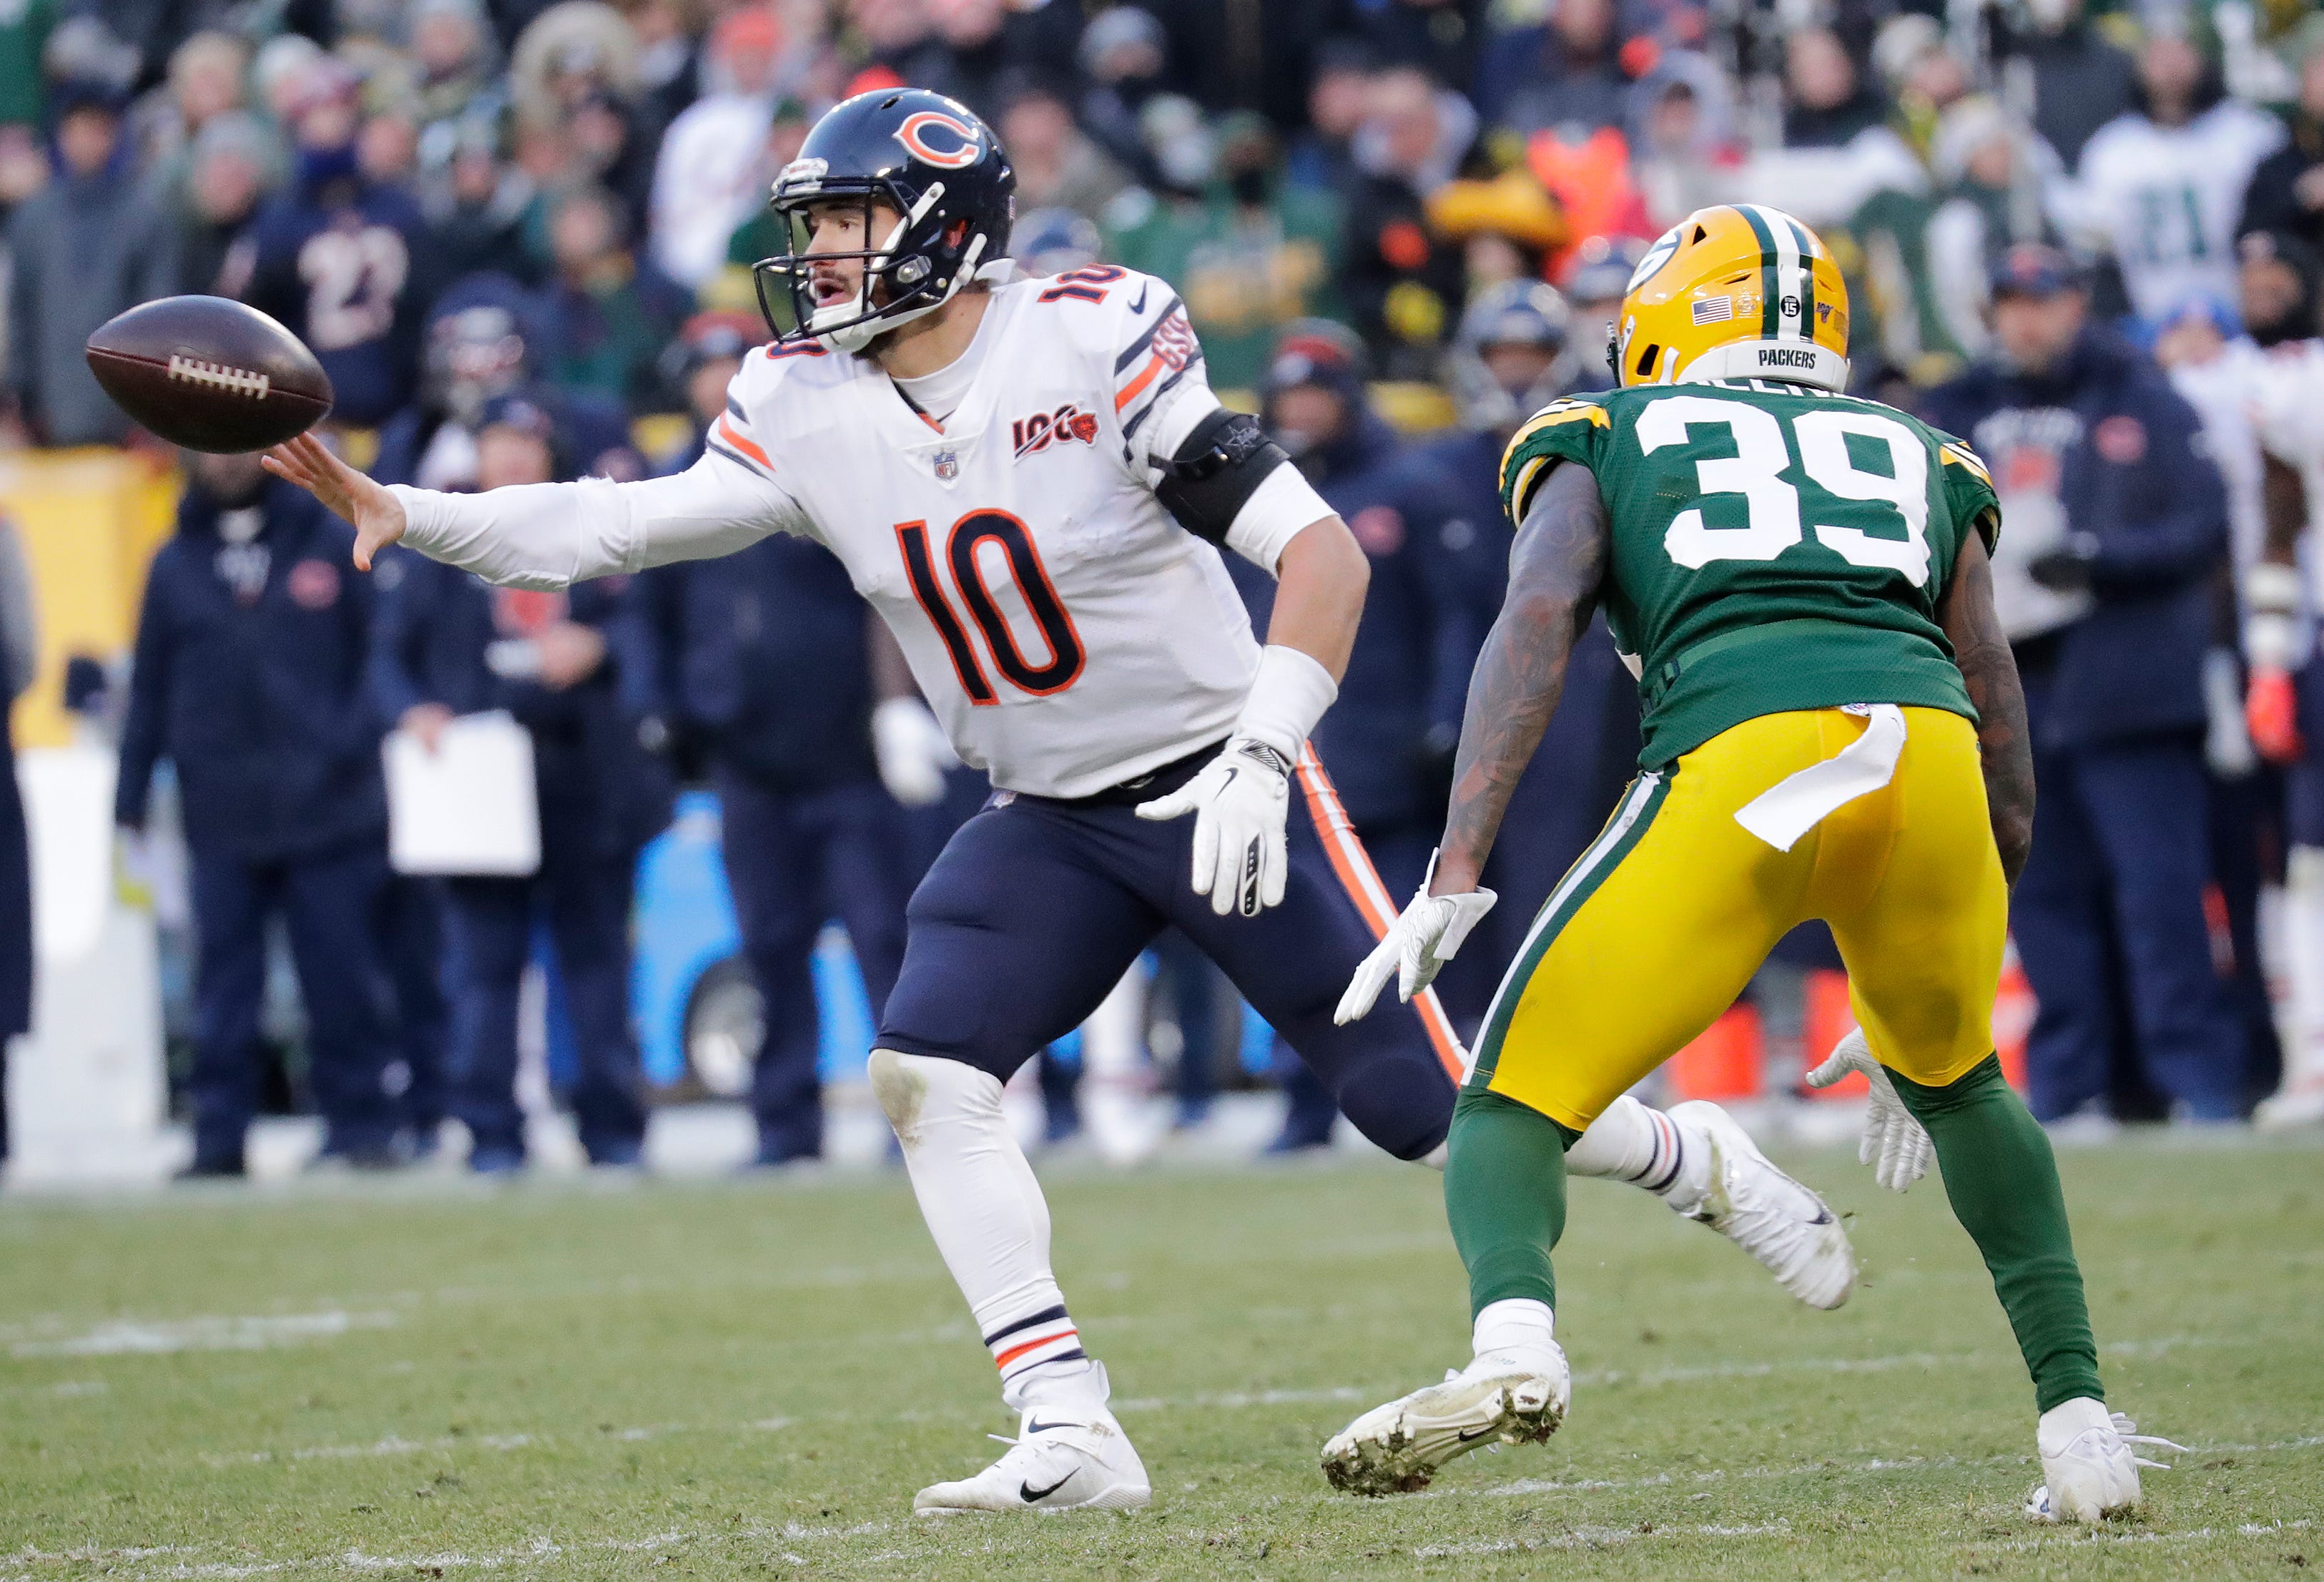 Chicago Bears quarterback Mitchell Trubisky (10) laterals the ball on the last play of the game against Green Bay Packers defensive back Chandon Sullivan (39) Sunday, December 15, 2019, at Lambeau Field in Green Bay, Wis.